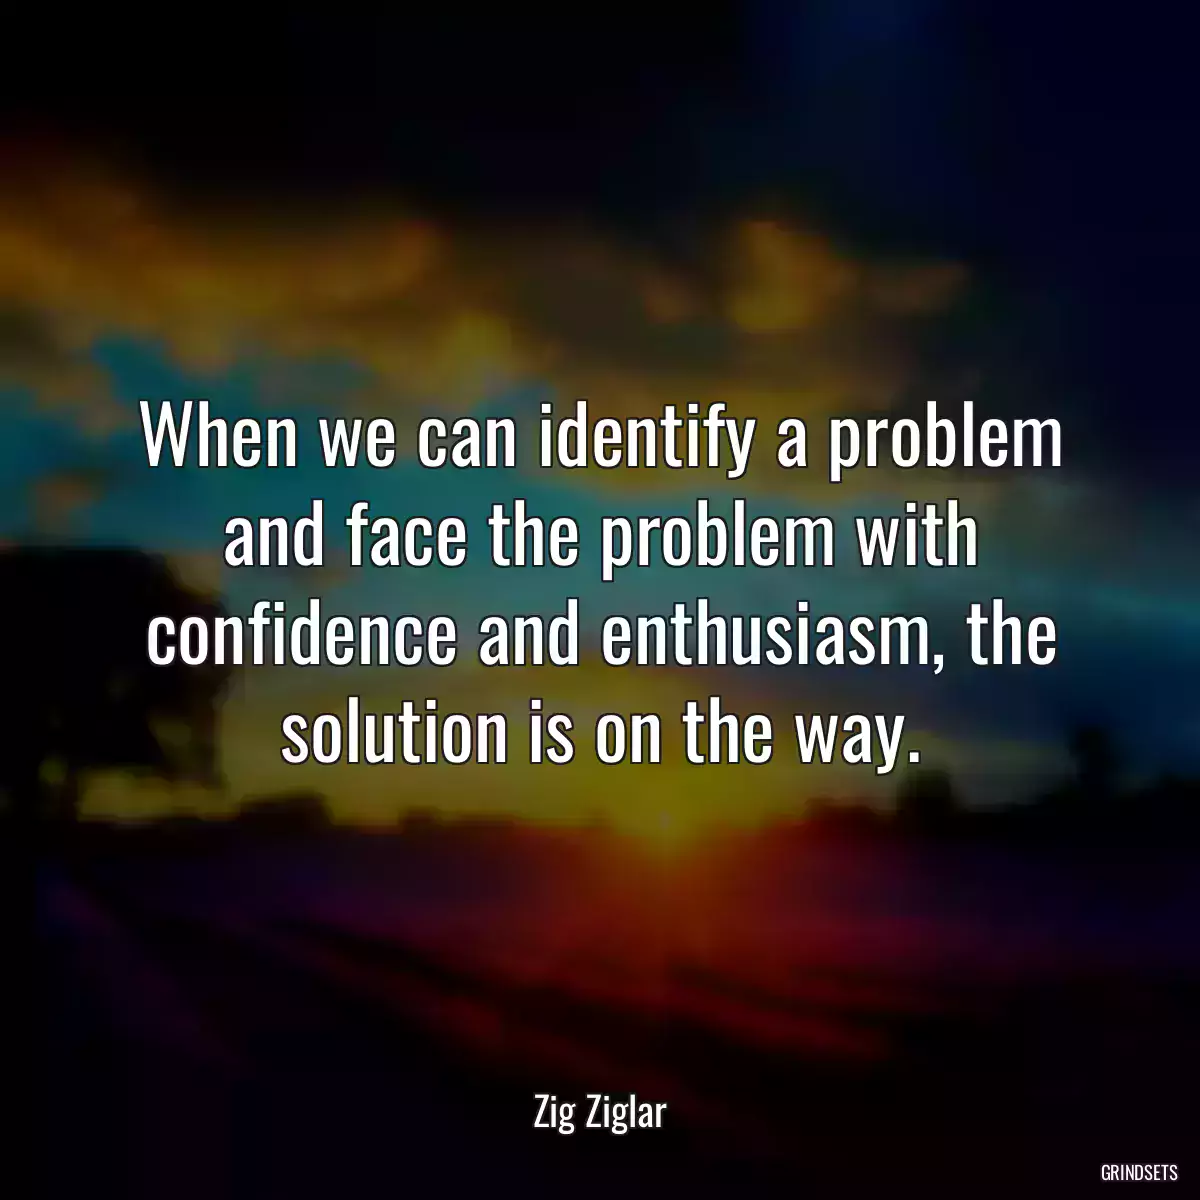 When we can identify a problem and face the problem with confidence and enthusiasm, the solution is on the way.